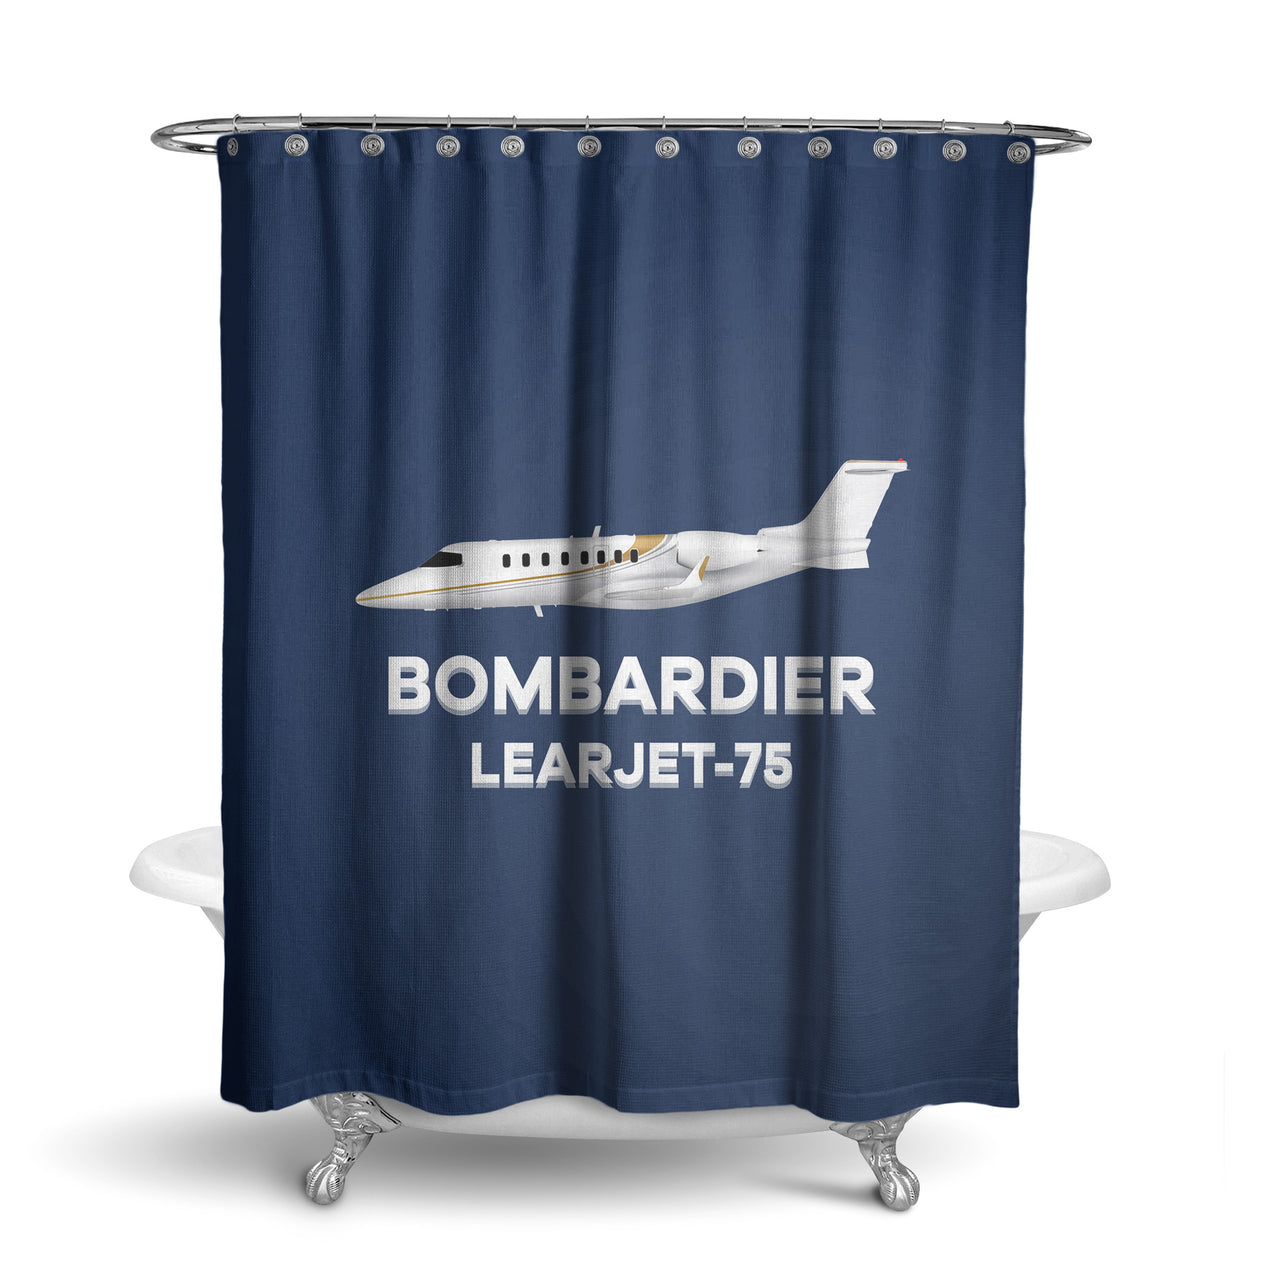 The Bombardier Learjet 75 Designed Shower Curtains